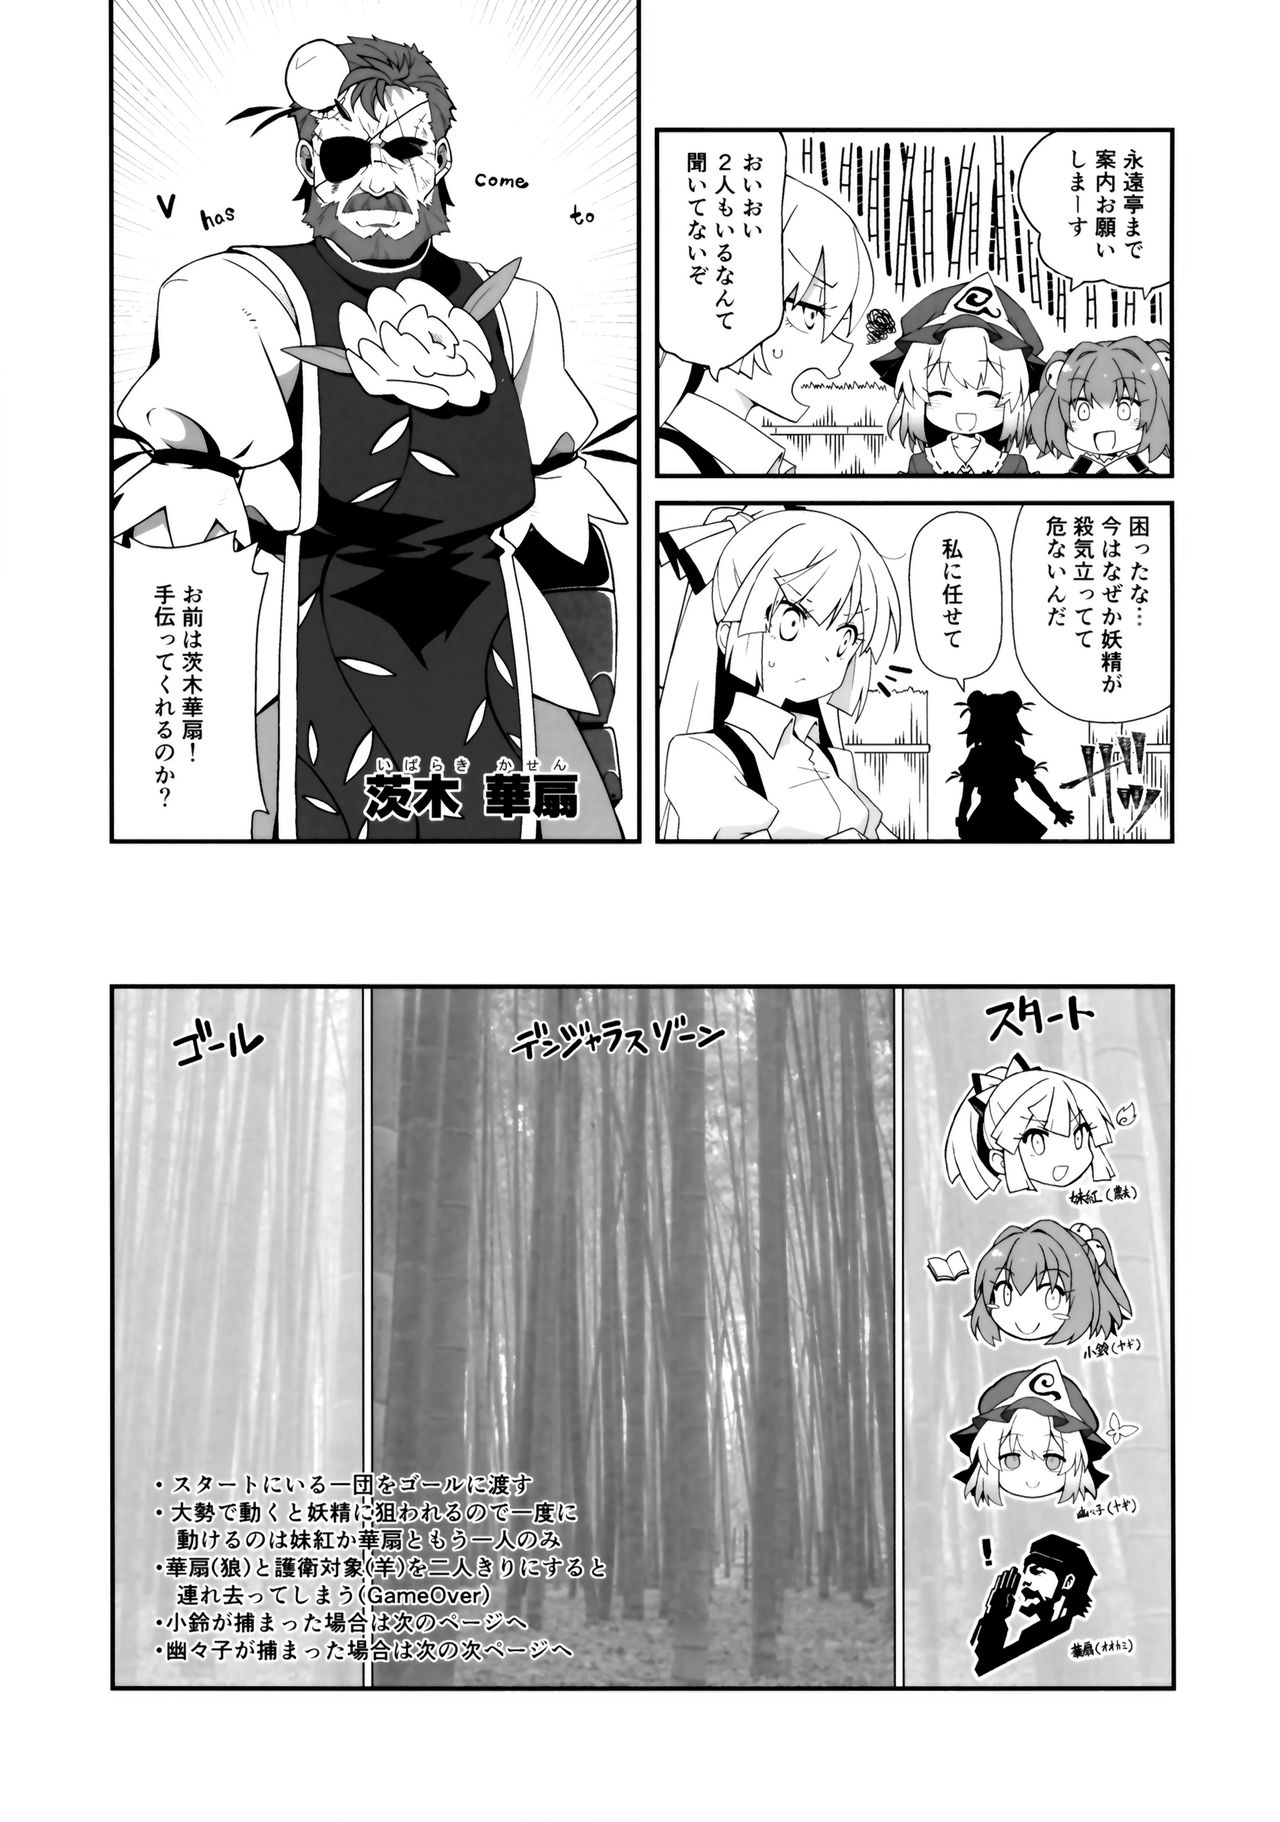 (C96) [Cola Bolt (Kotomuke Fuurin)] RE: I AM (Touhou Project) page 12 full